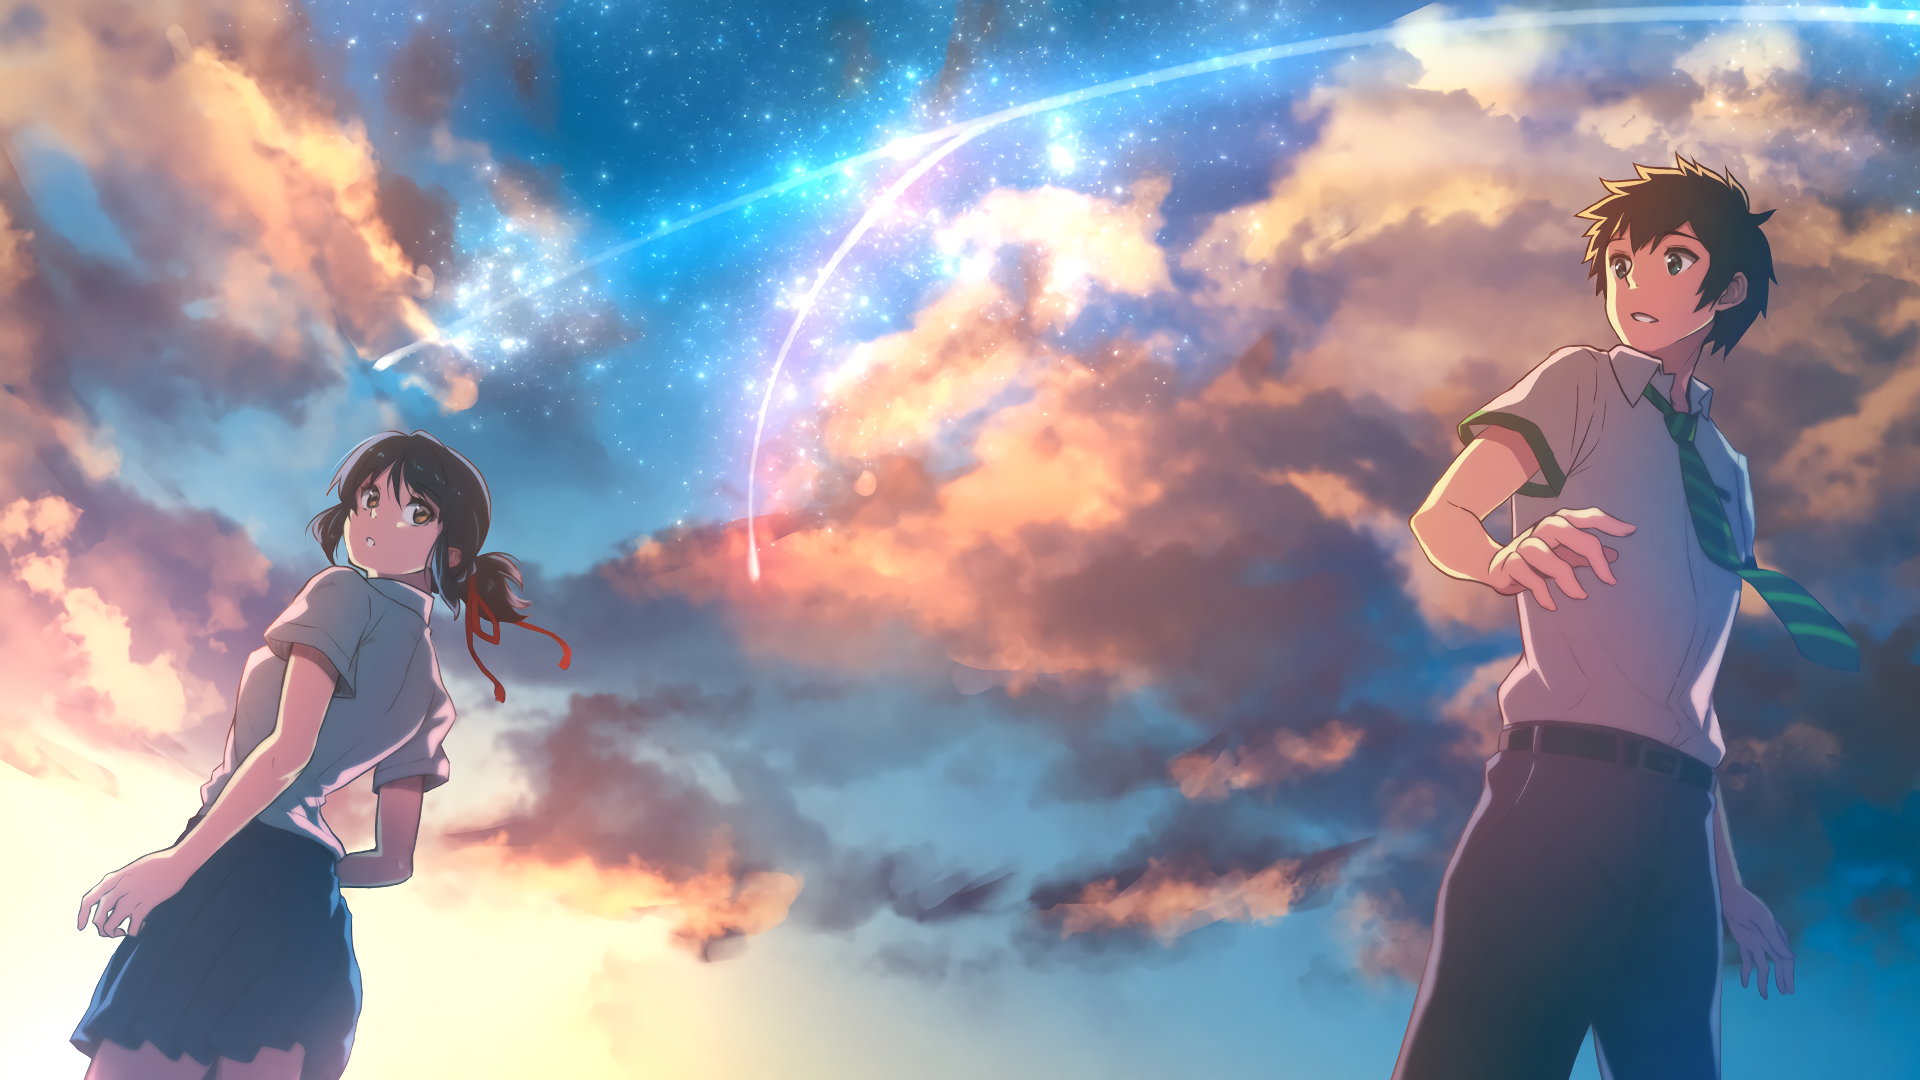 Wallpapers with your name wallpapers â wallpapers k kimi no na wa your name anime kimi no na wa wallpaper